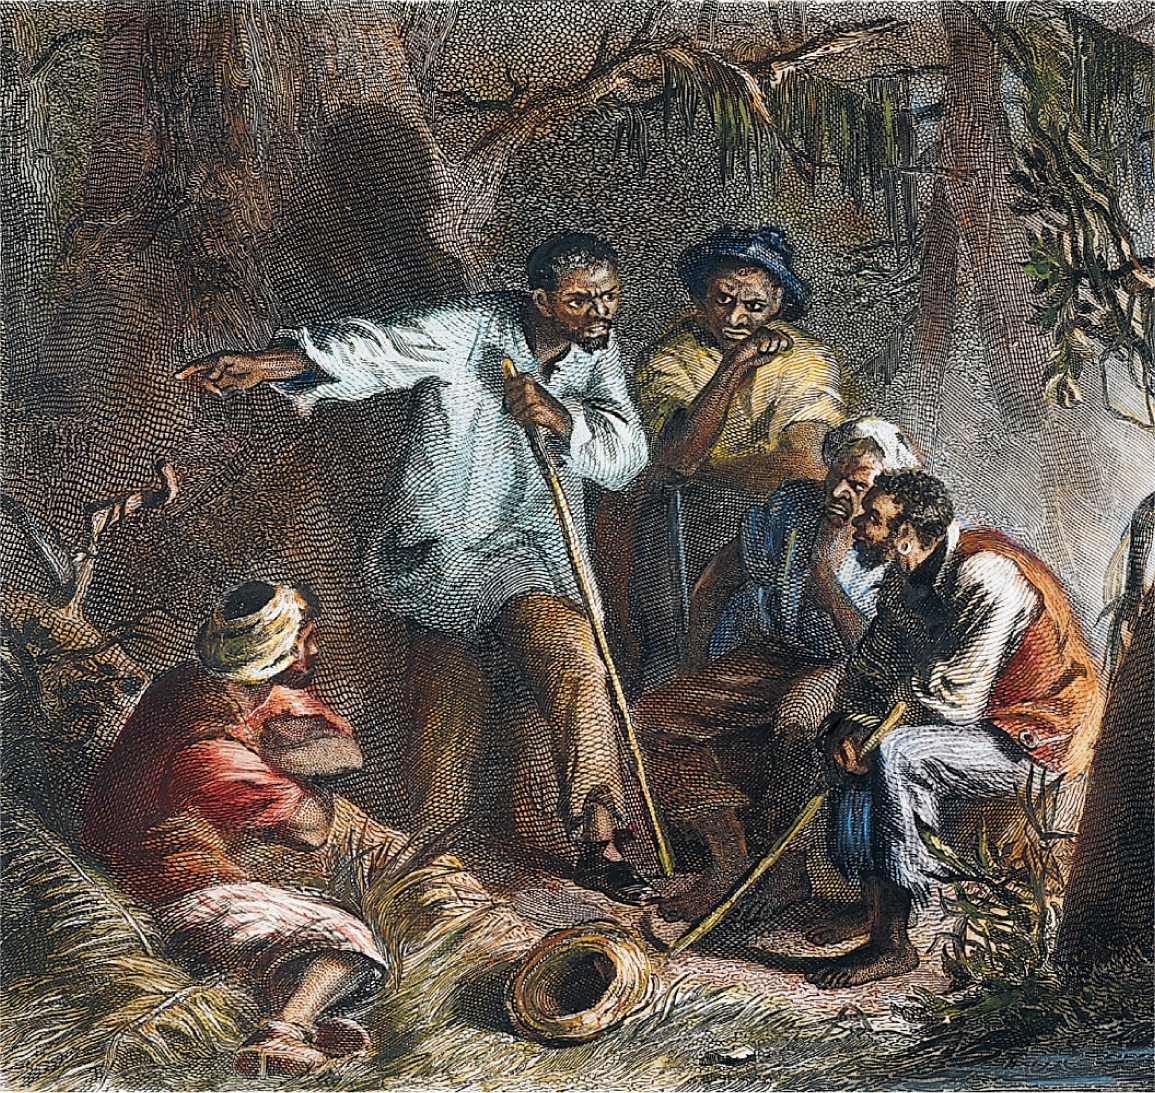 A drawing shows Nat Turner speaking to other slaves in a
clearing in the woods.